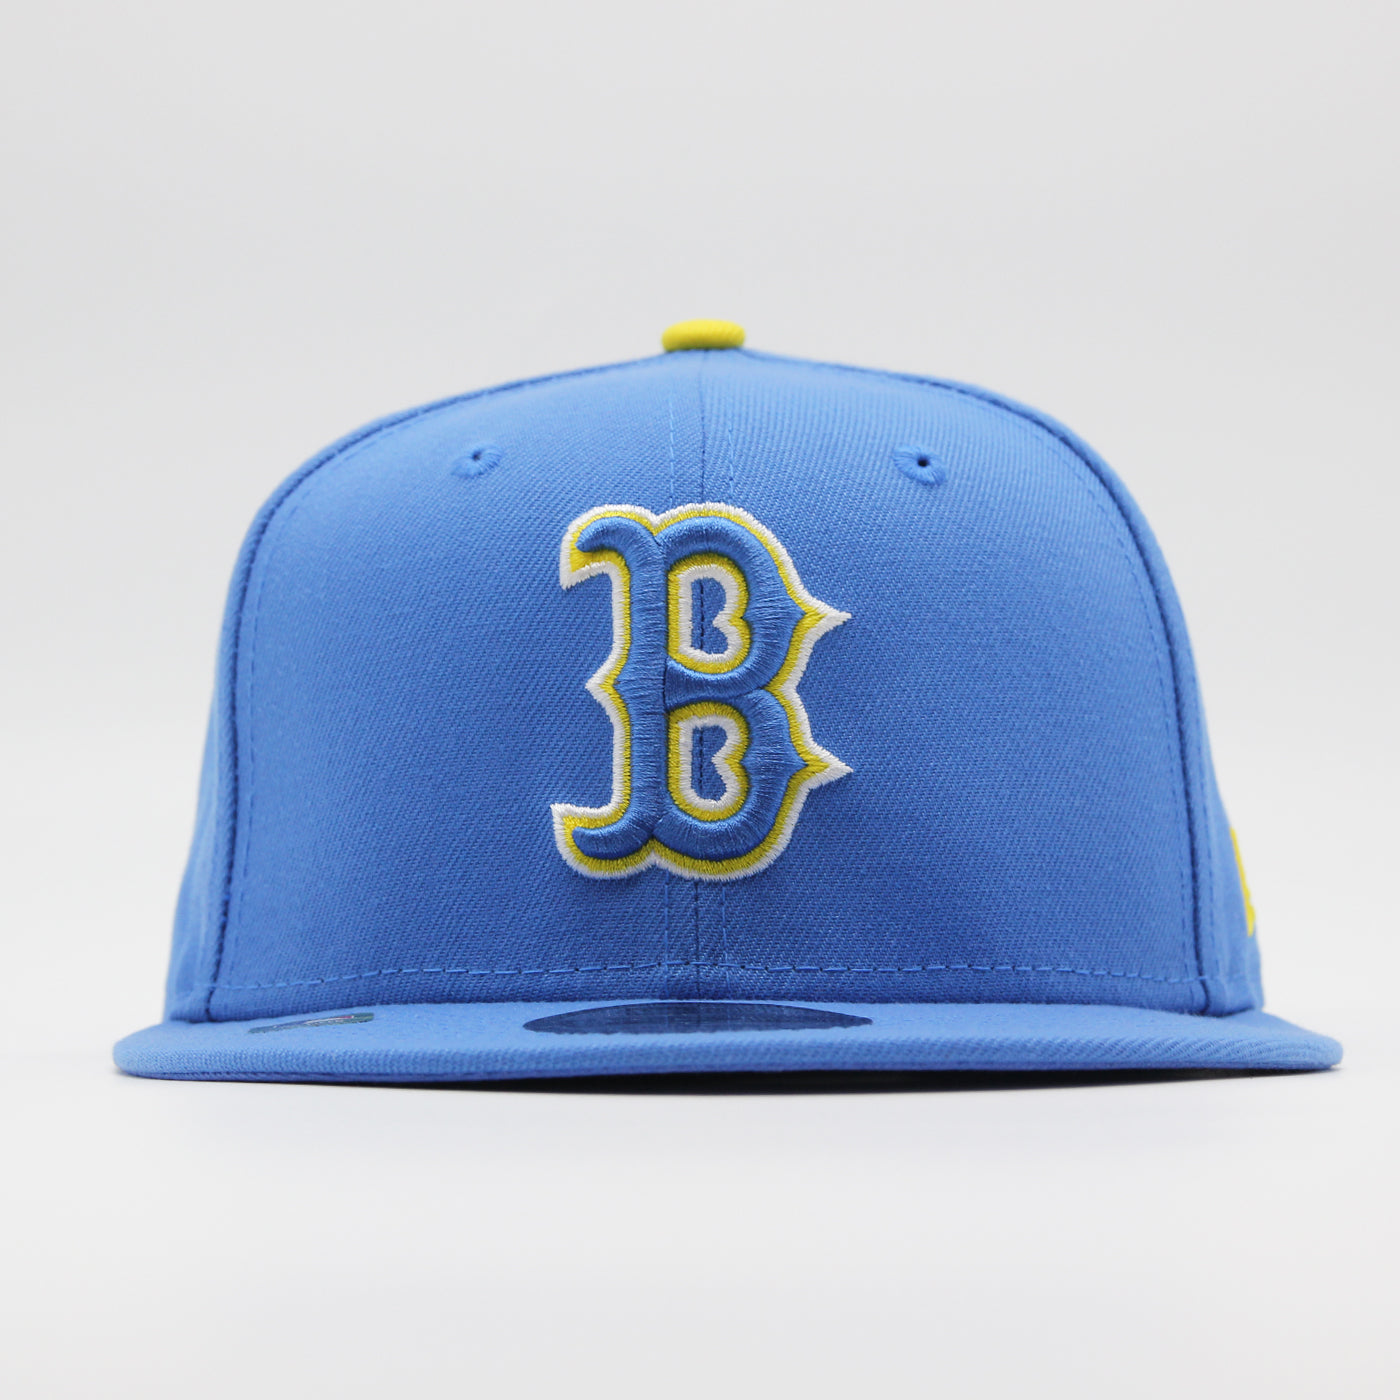 New Era MLB21 City Connect 9Fifty B Red Sox baby blue